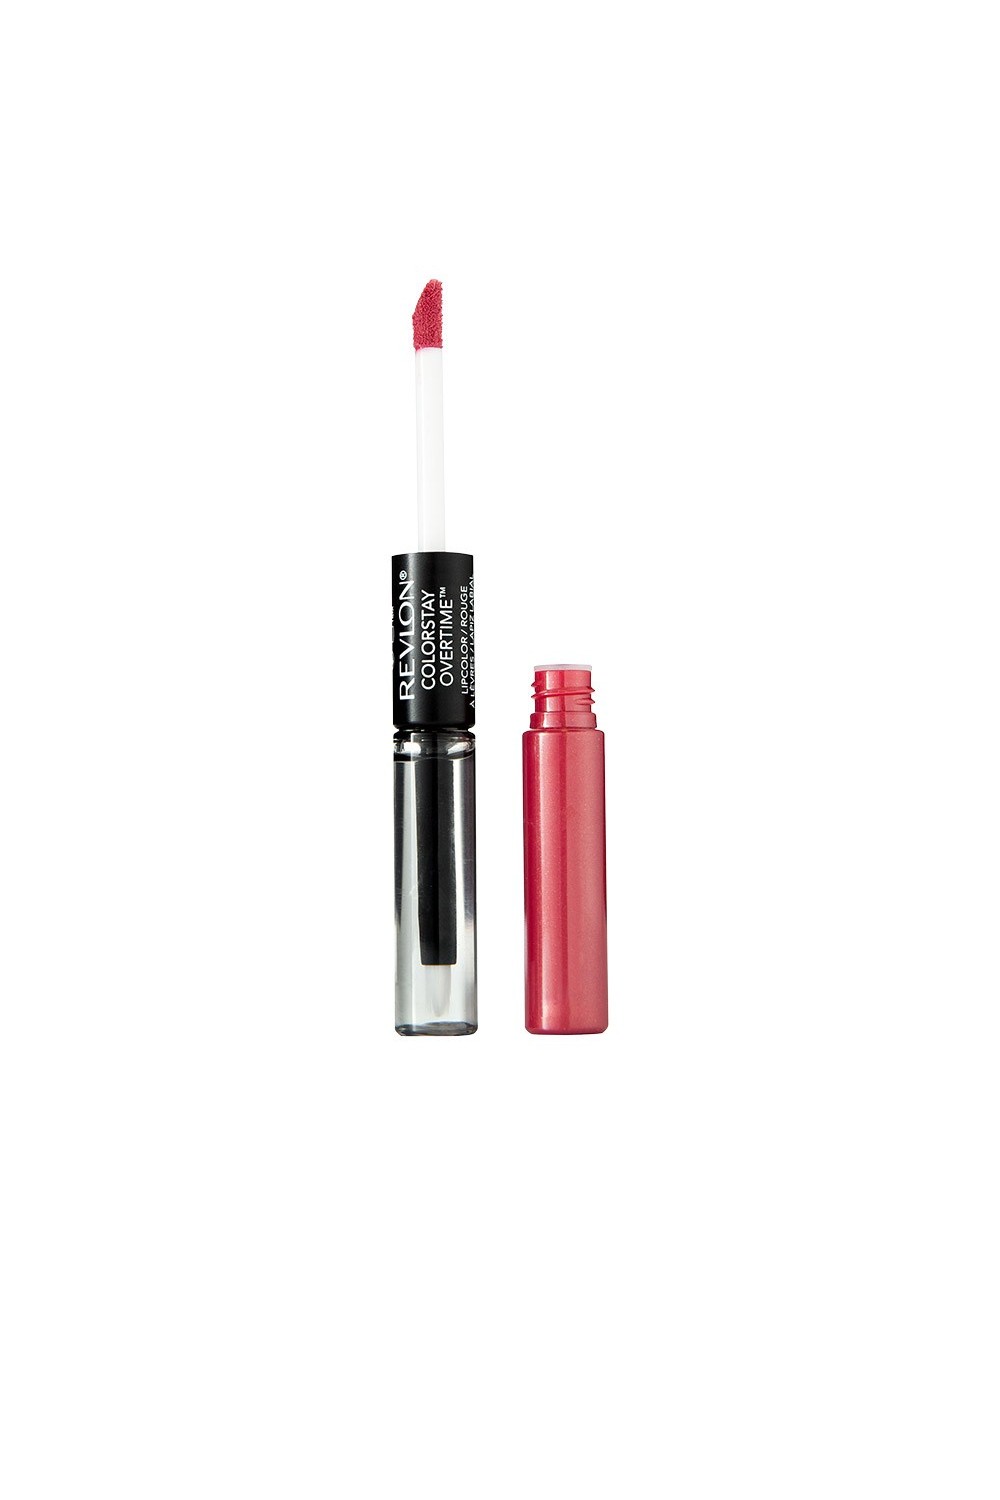 Revlon Colorstay Overtime Lipcolor 20 Constantly Coral 2ml